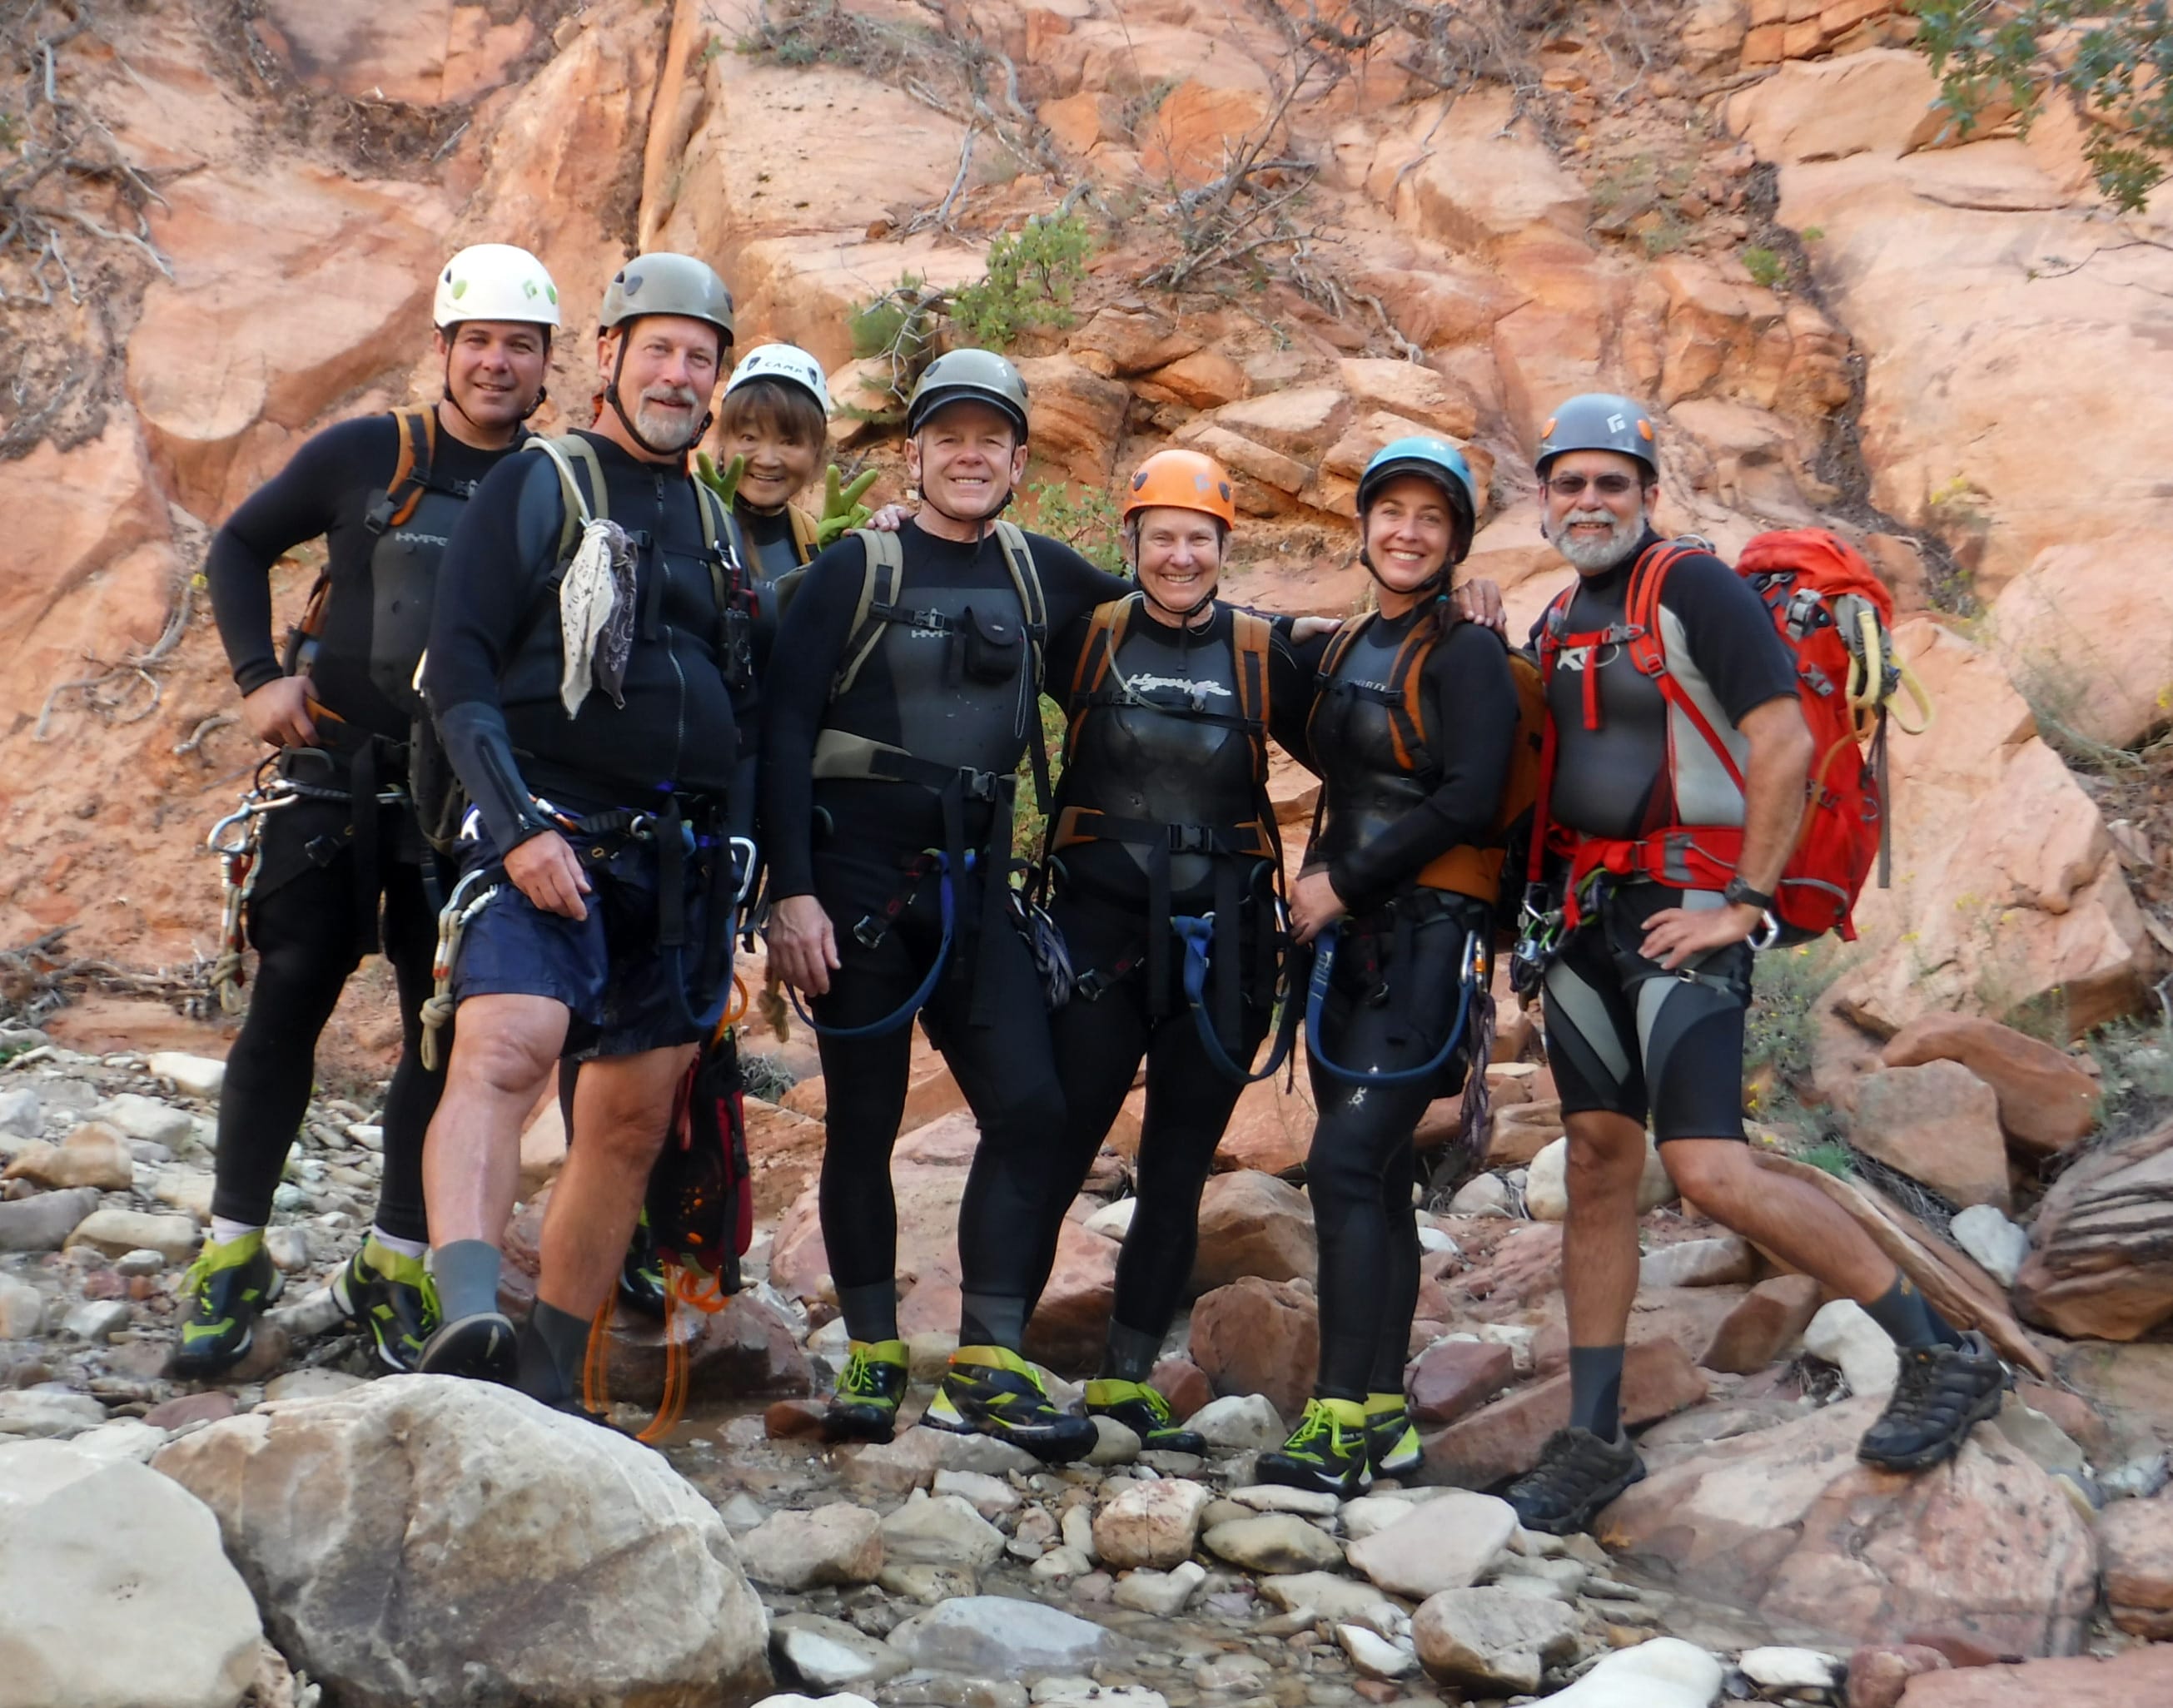 This photo released by National Park Service shows from left to right: Gary Favela, Don Teichner, Muku Reynolds, Steve Arthur, Linda Arthur, Robin Brum, and Mark MacKenzie.  The hikers, six from California and one from Nevada, died when fast-moving floodwaters rushed through a narrow park canyon Monday.